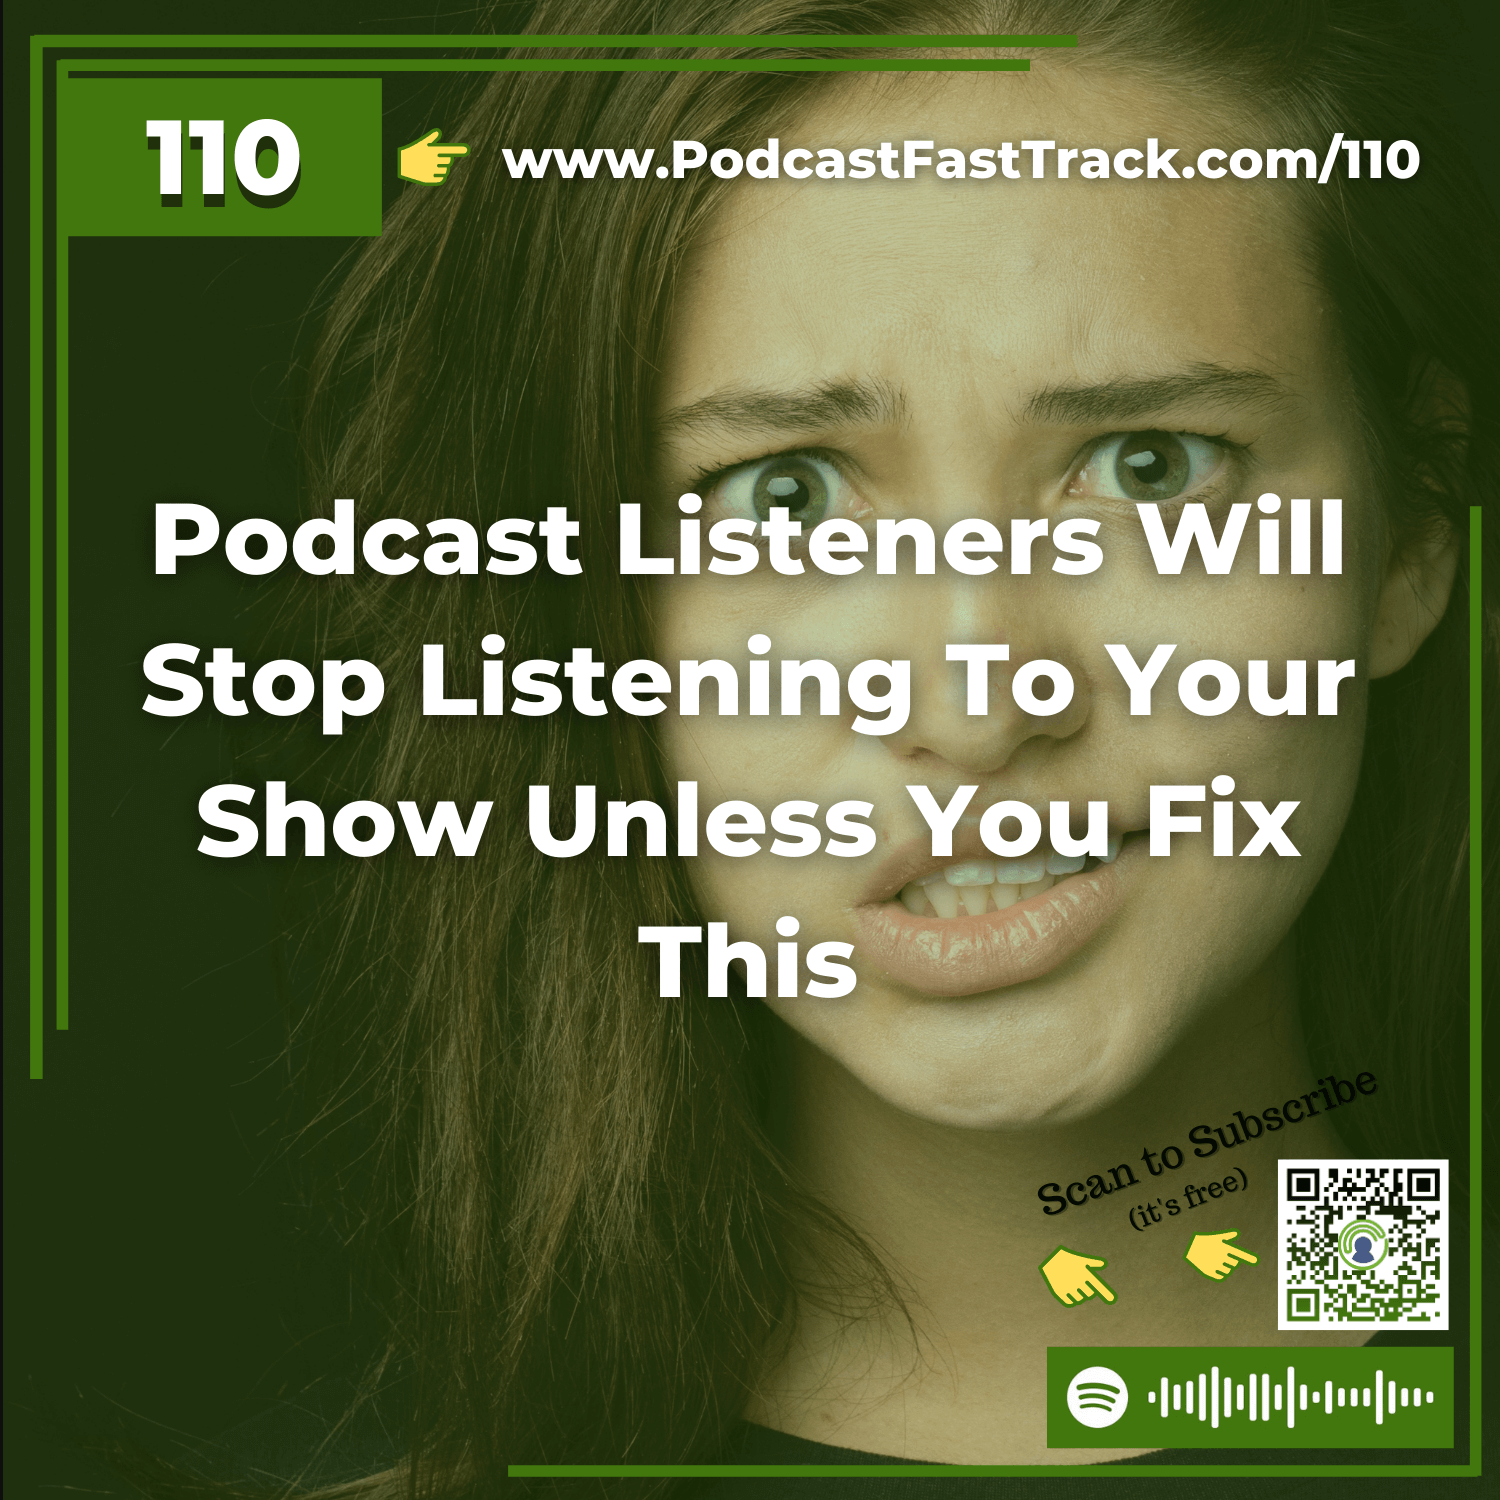 110: Podcast Listeners Will Stop Listening To Your Show Unless You Fix This